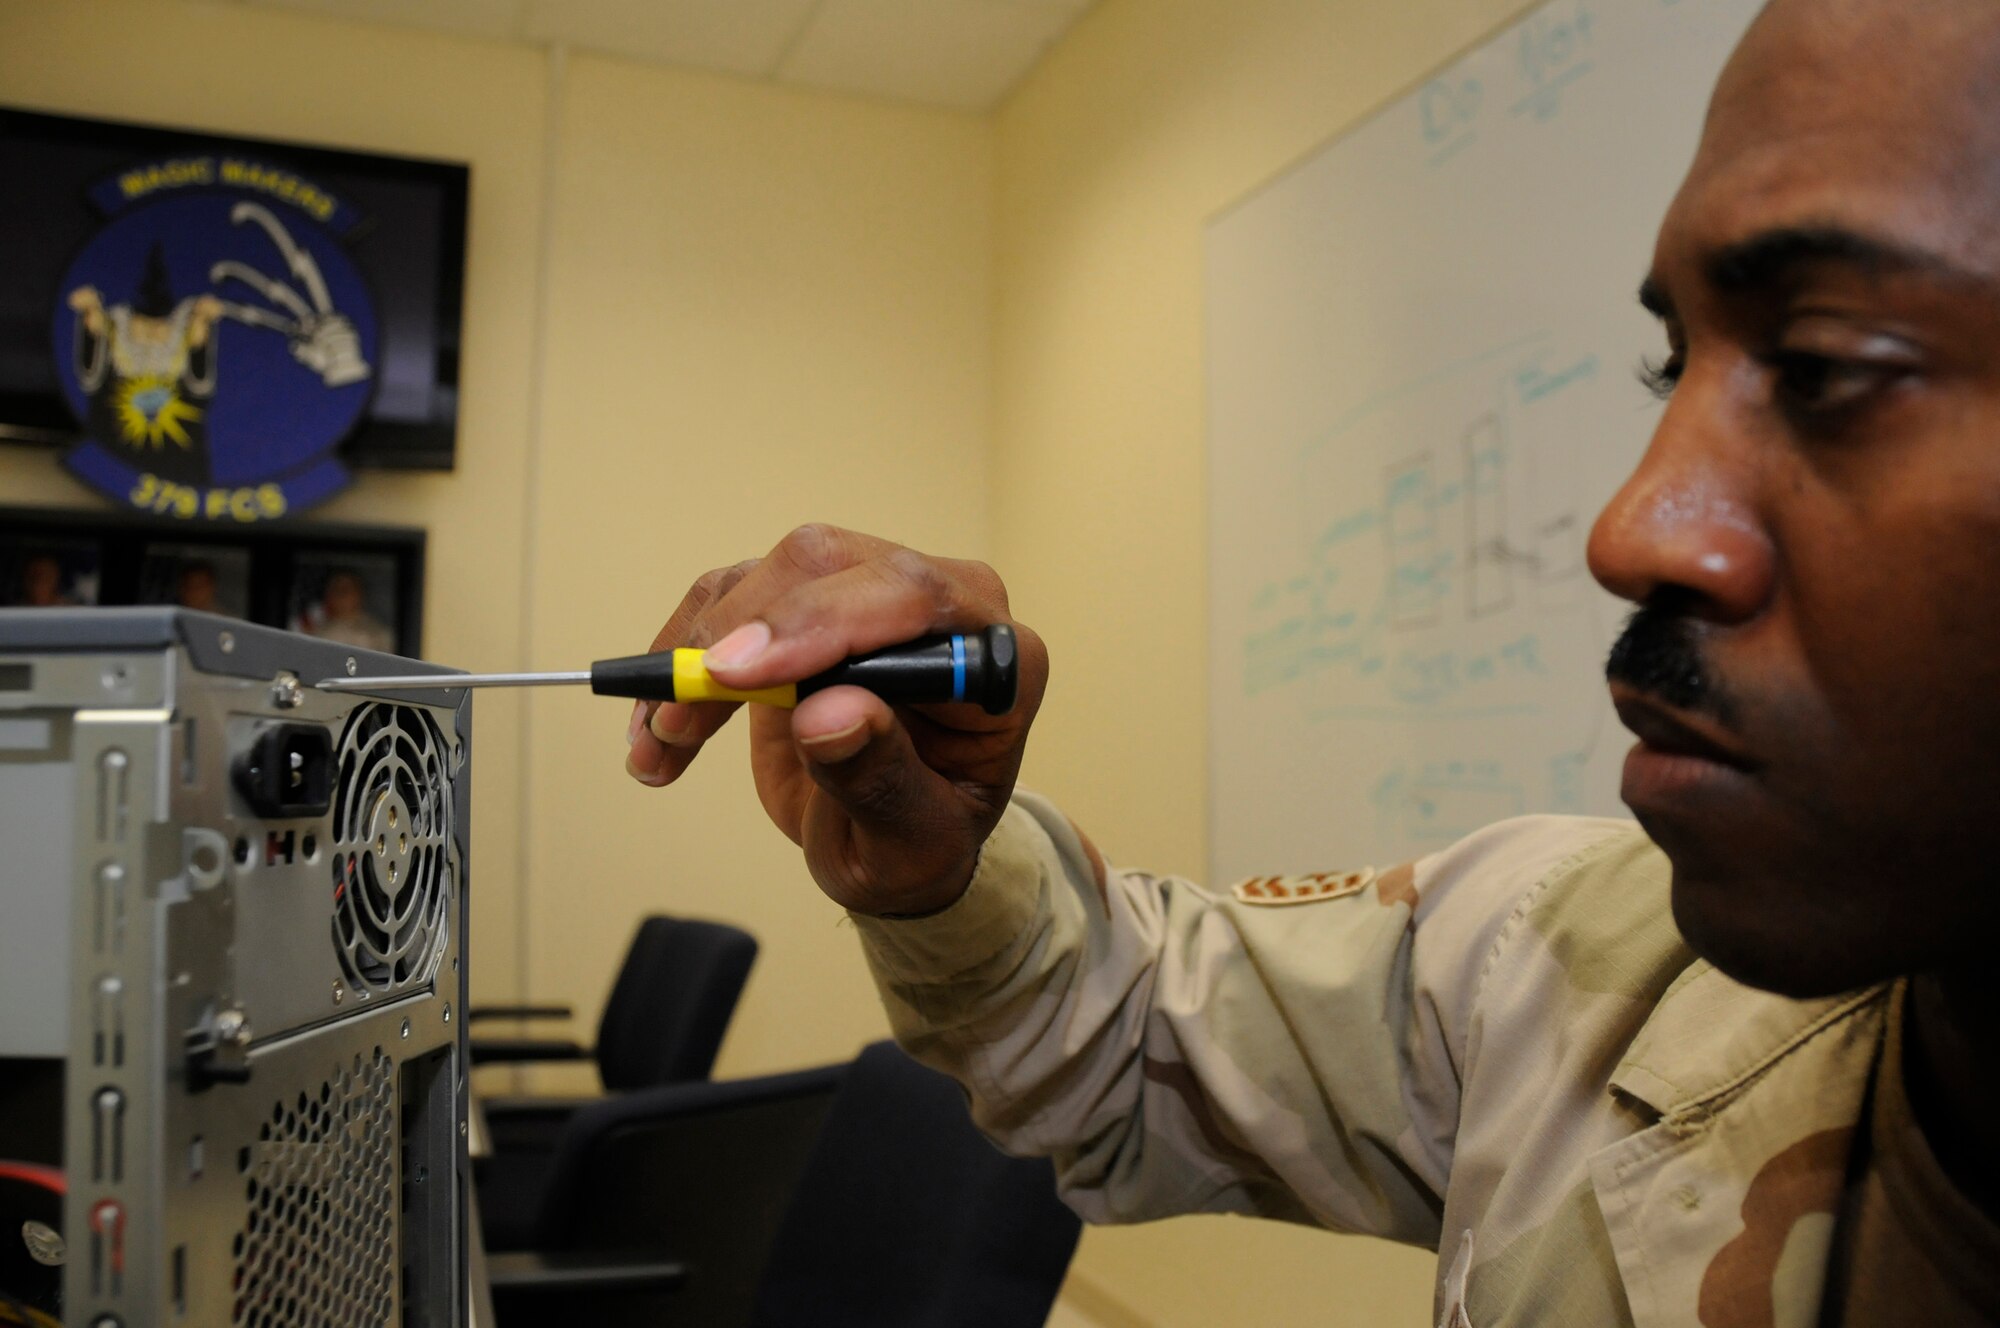 Tech. Sgt. Thomas Gipson, resource advisor for the 379th Expeditionary Communications Squadron, uses a screwdriver to install a power supply in a personal computer Sept. 7, 2008, at an undisclosed location in Southwest Asia. Sergeant Gipson and other resource advisors here approve and purchase communications devices for use in support of Operations Iraqi and Enduring Freedom and Joint Task Force-Horn of Africa. Sergeant Gipson, a native of Waycross, Ga., is deployed from Scott Air Force Base, Ill. (U.S. Air Force photo by Staff Sgt. Darnell T. Cannady/Released)